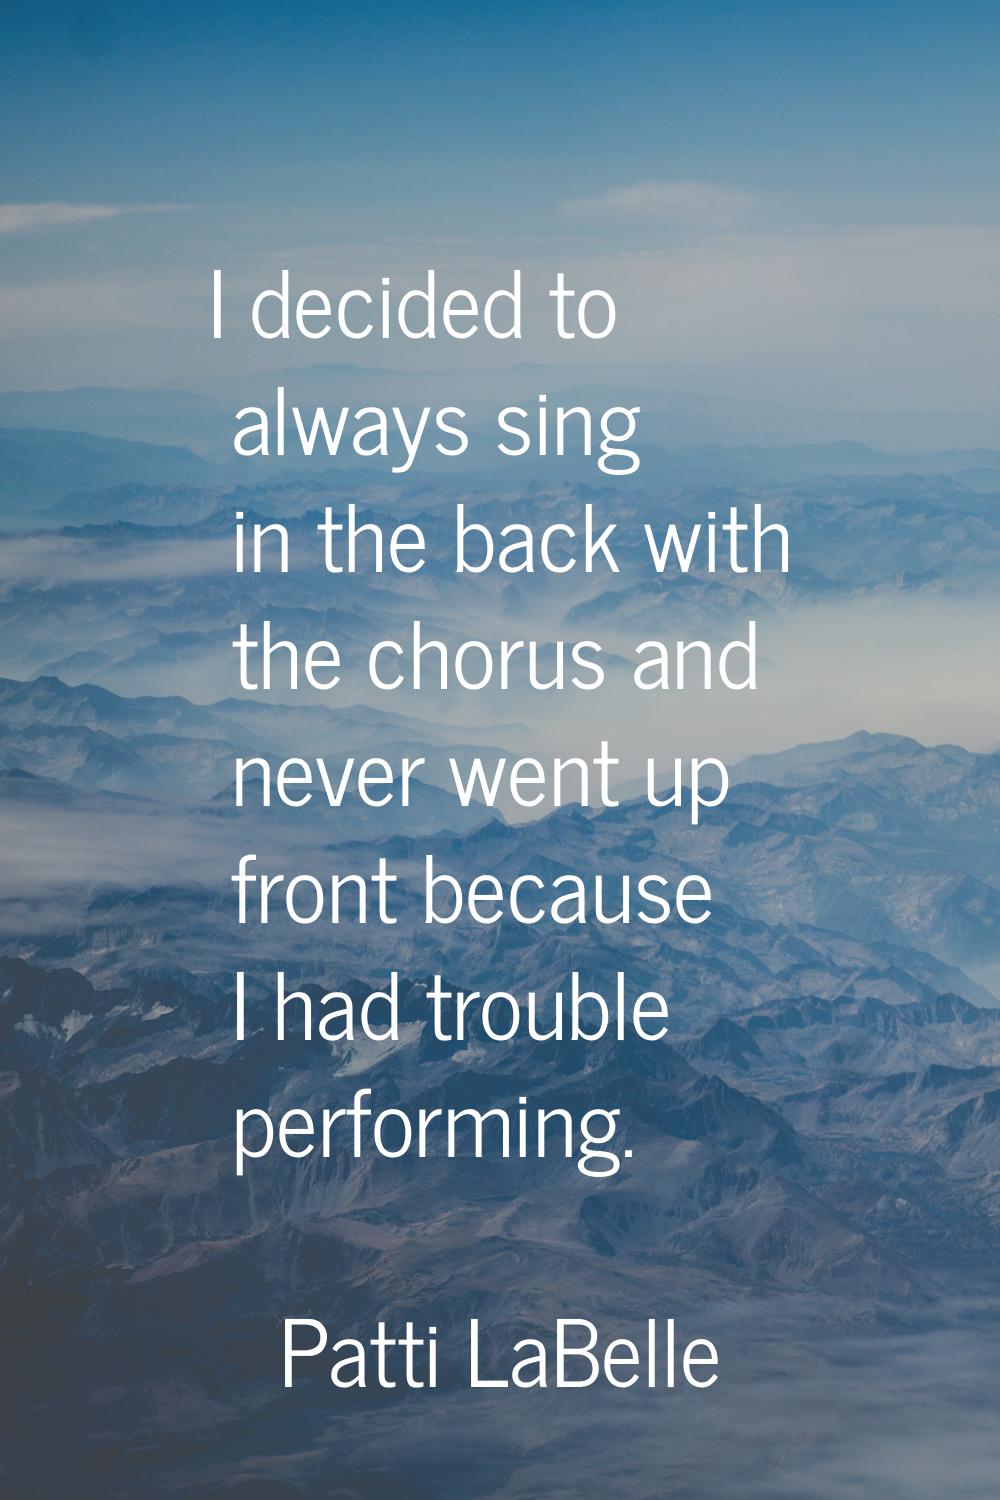 I decided to always sing in the back with the chorus and never went up front because I had trouble 